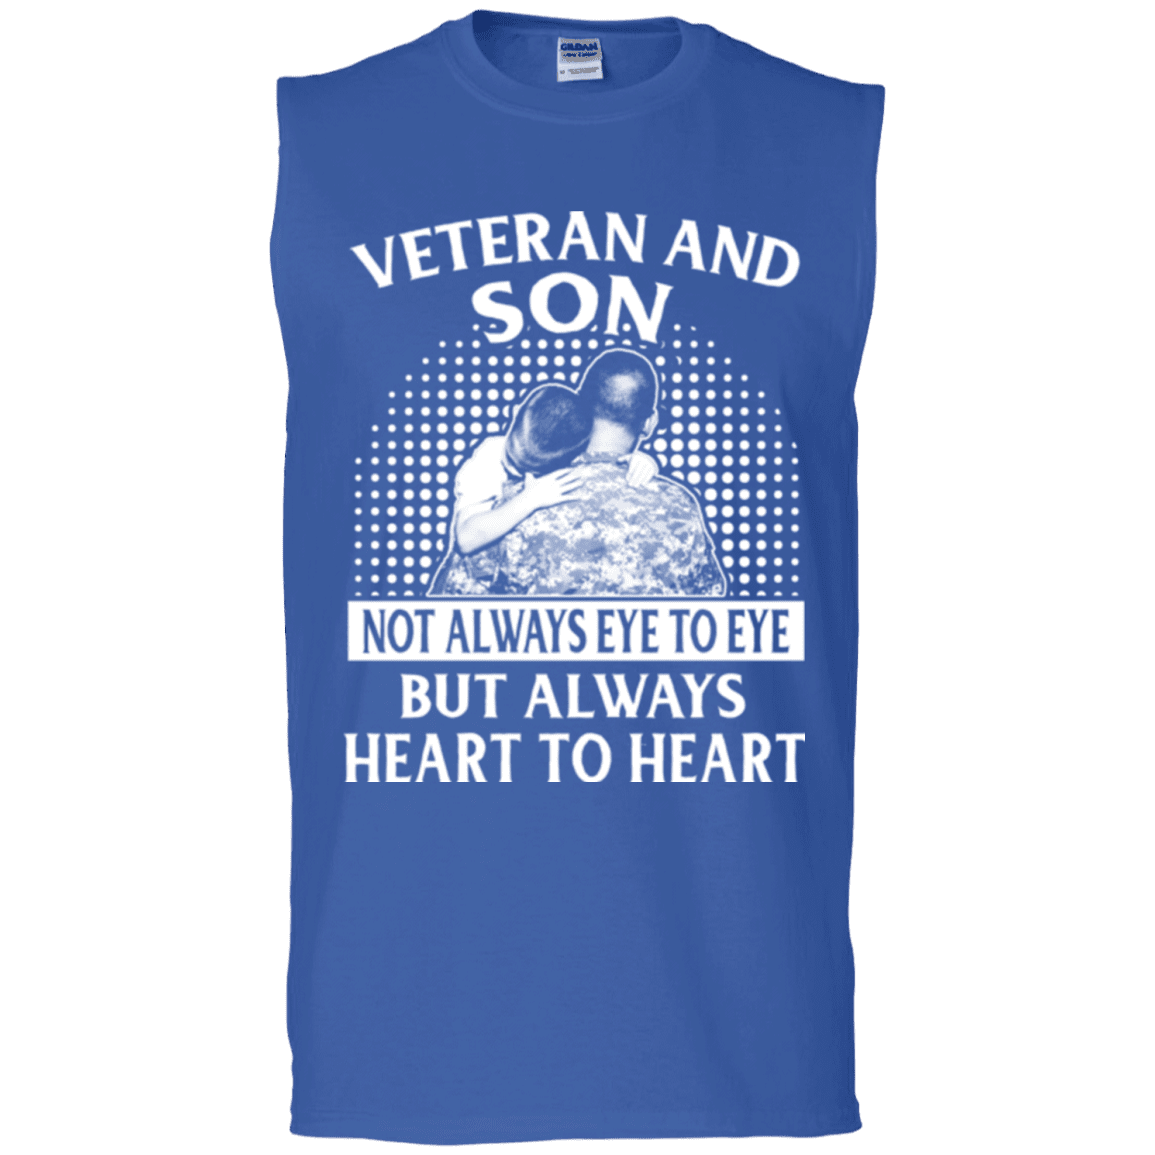 Military T-Shirt "VETERAN AND SON ALWAYS HEART TO HEART"-TShirt-General-Veterans Nation